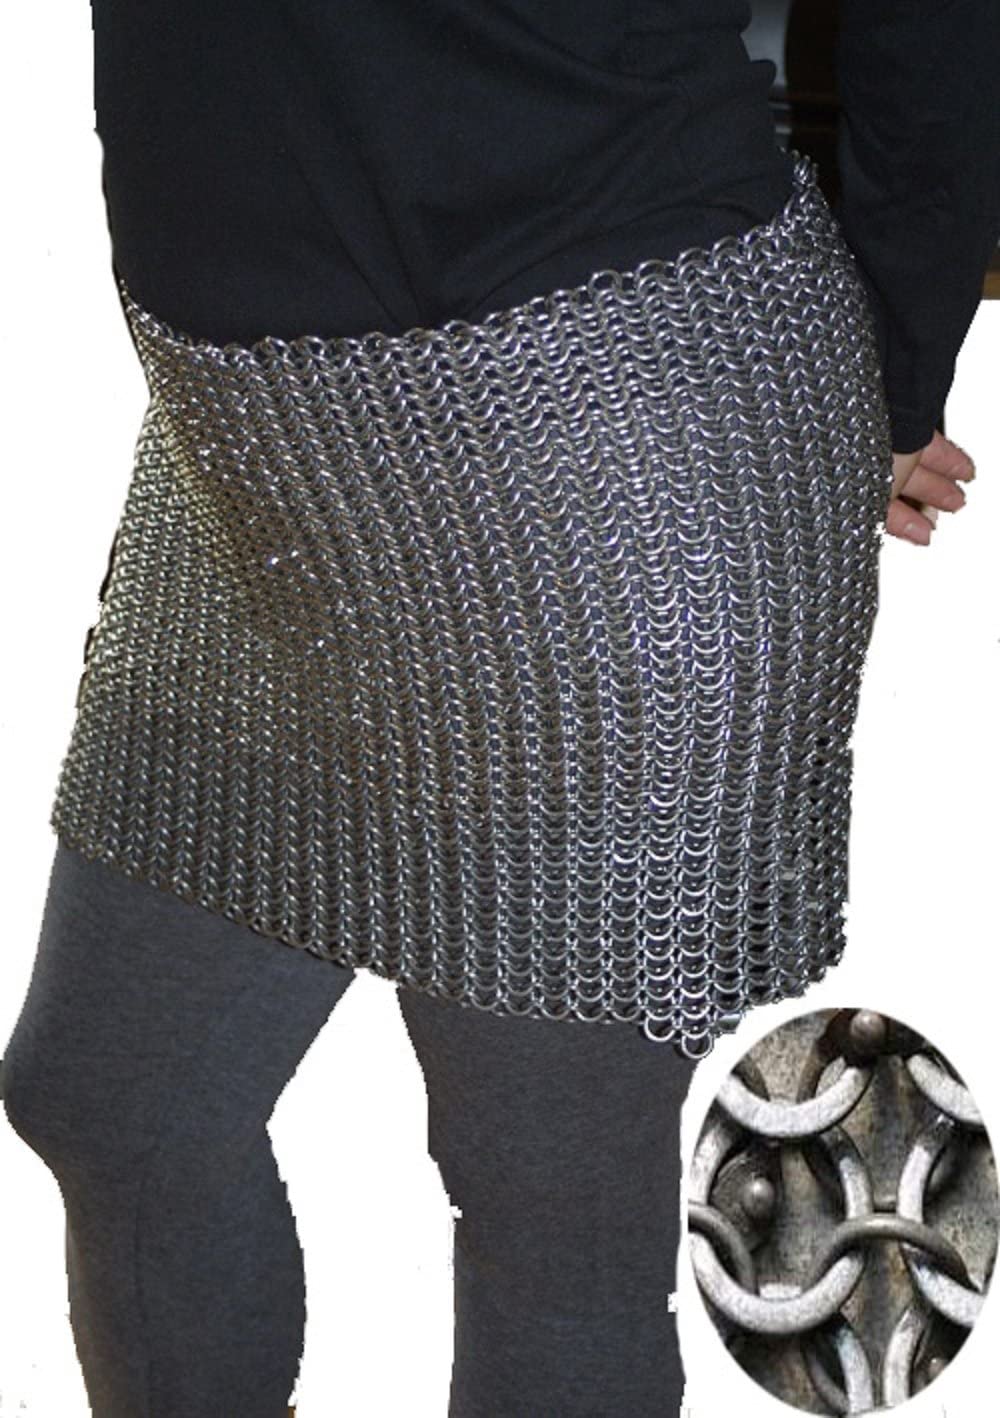 SALE FOR BIRTHDAYMedieval Knight Chain mail Skirt 9 mm Flat Riveted With Warsher 